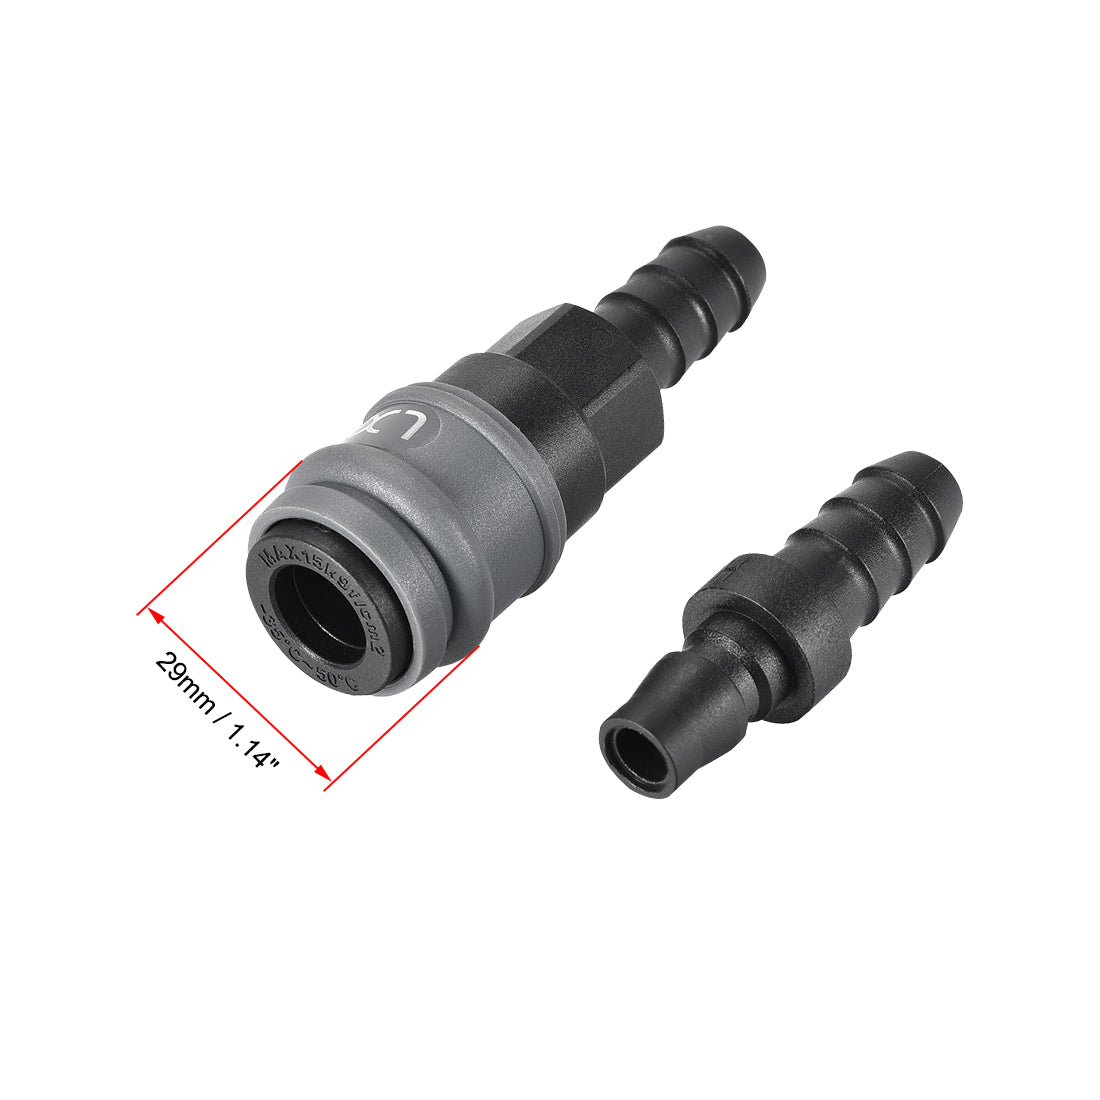 uxcell Uxcell Air Quick Coupler 40SH 40PH, POM Connector Plug Quick Disconnect 116.5mm Length for 12-13mm ID Tube 2 Set